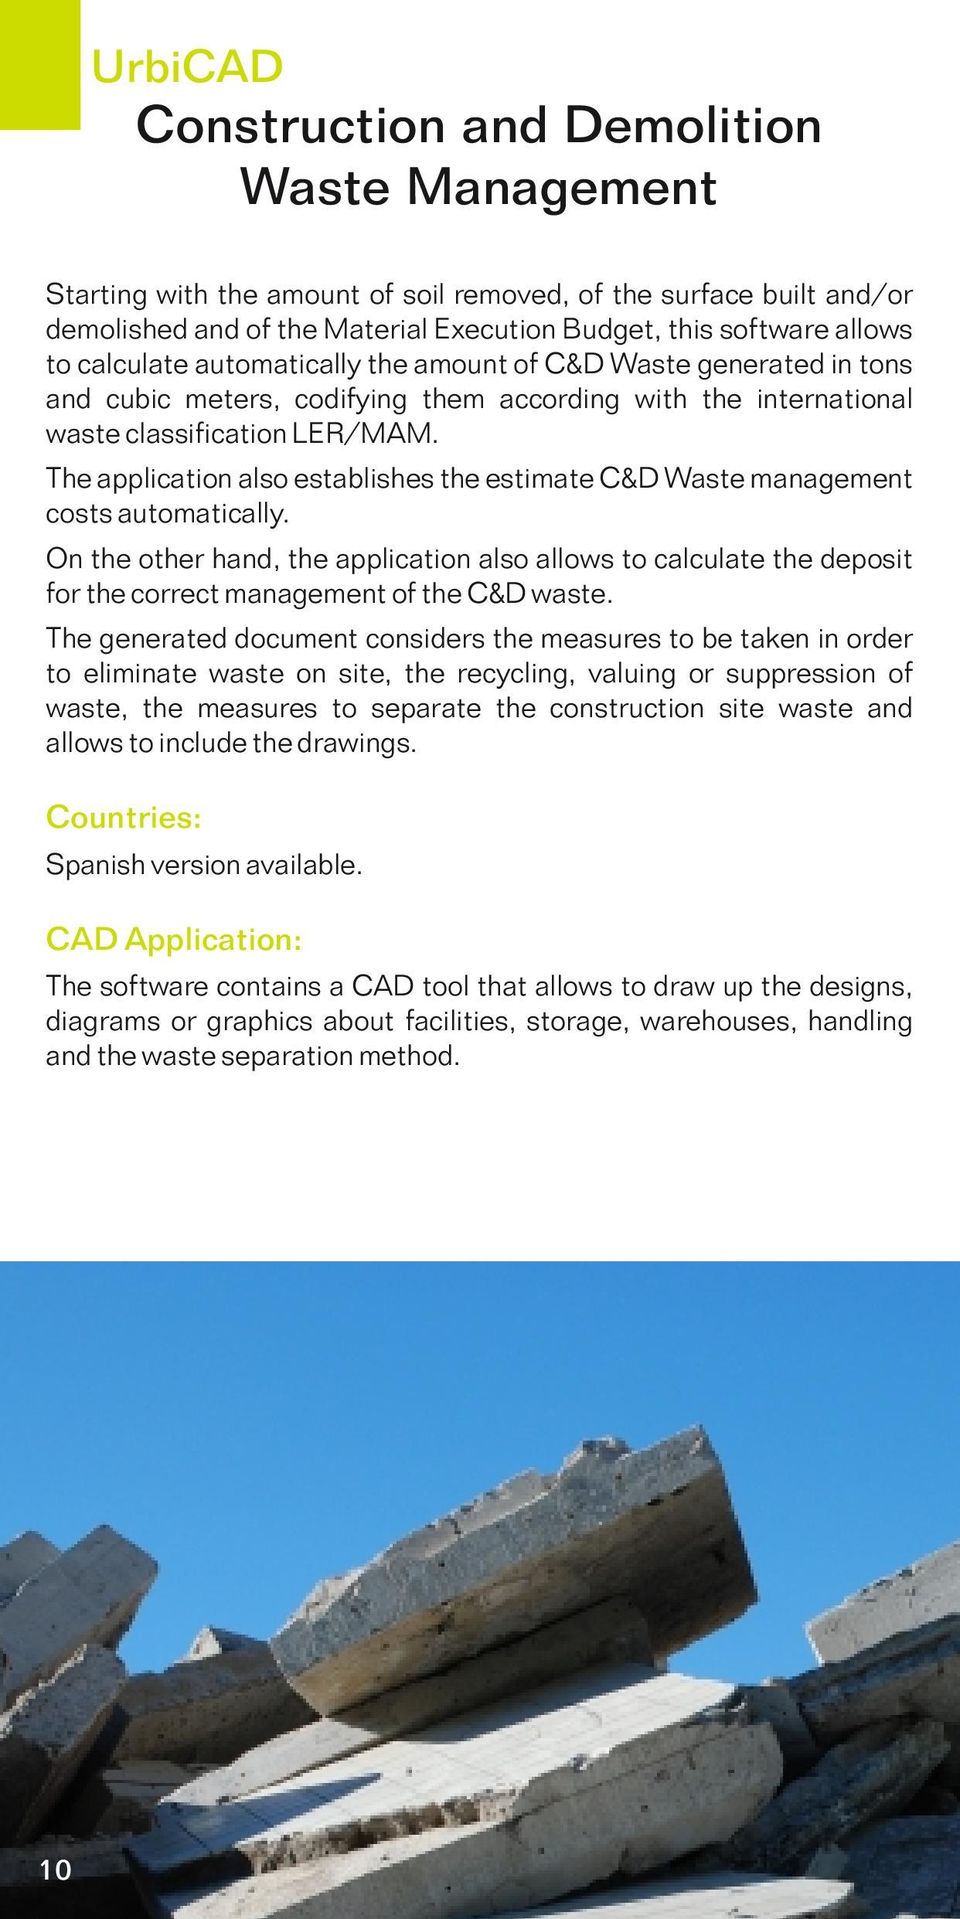 The application also establishes the estimate C&D Waste management costs automatically.